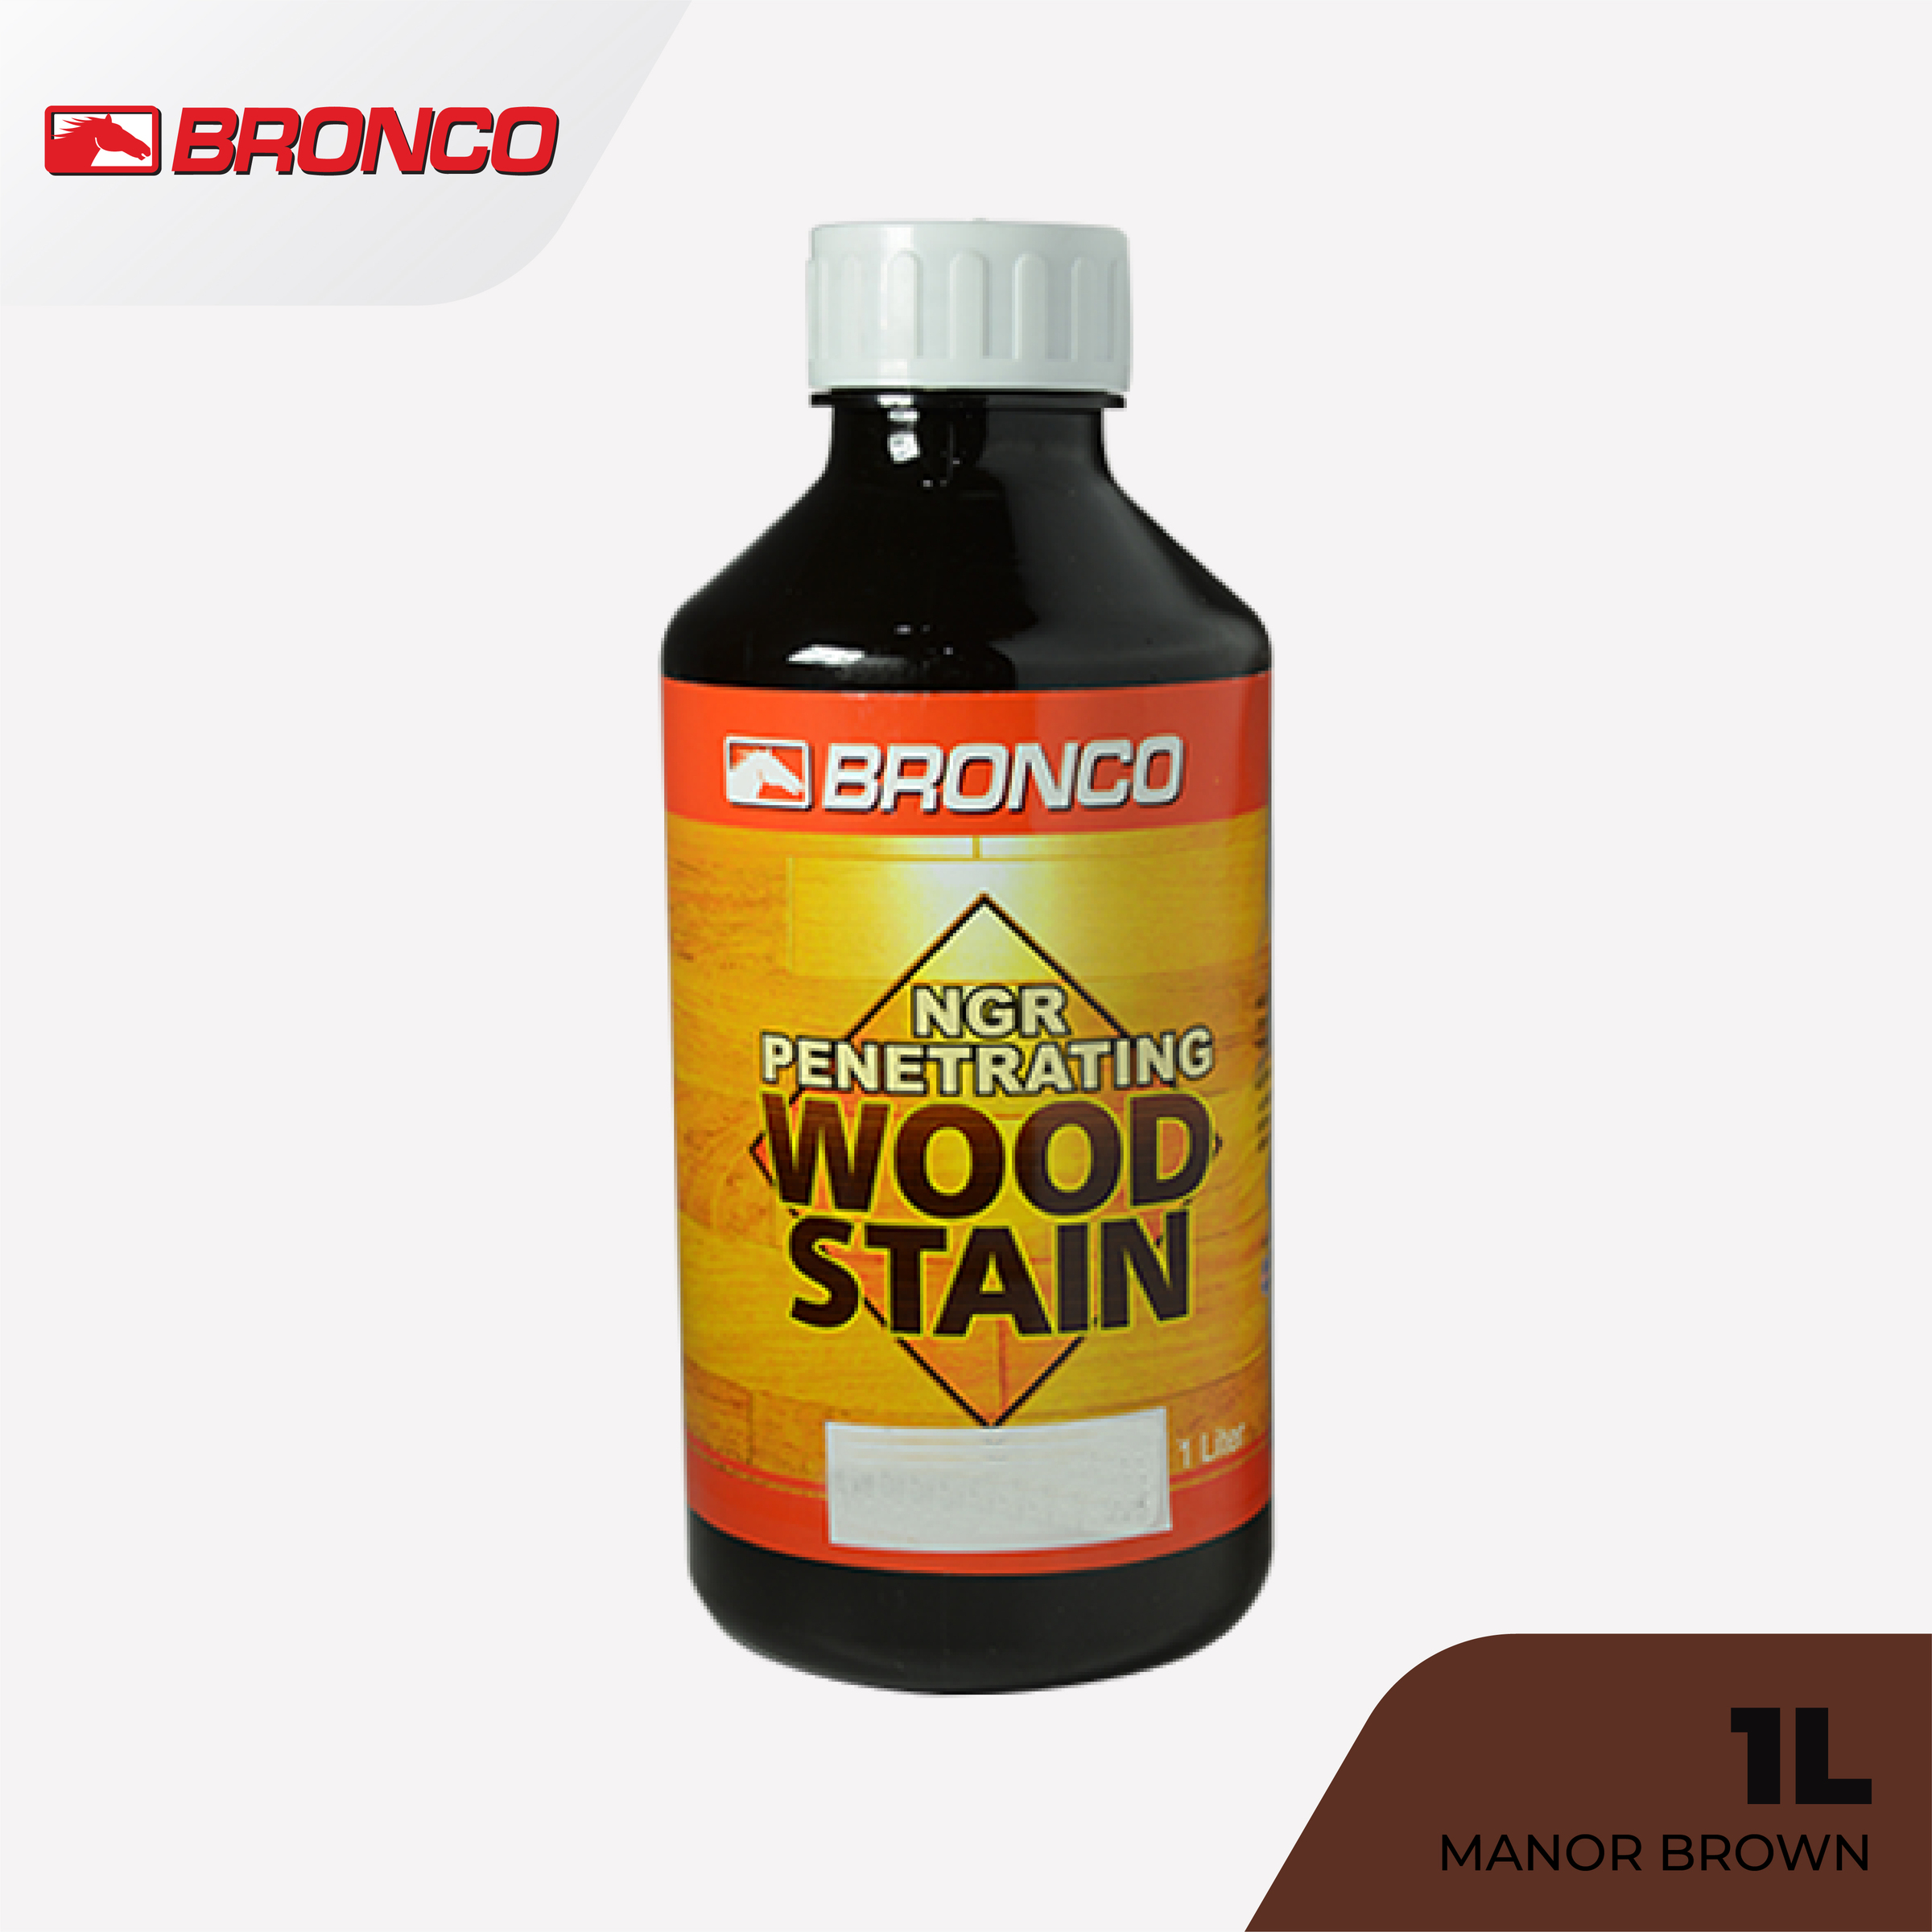 Bronco NGR Penetrating Wood Stain Manor Brown - 1L